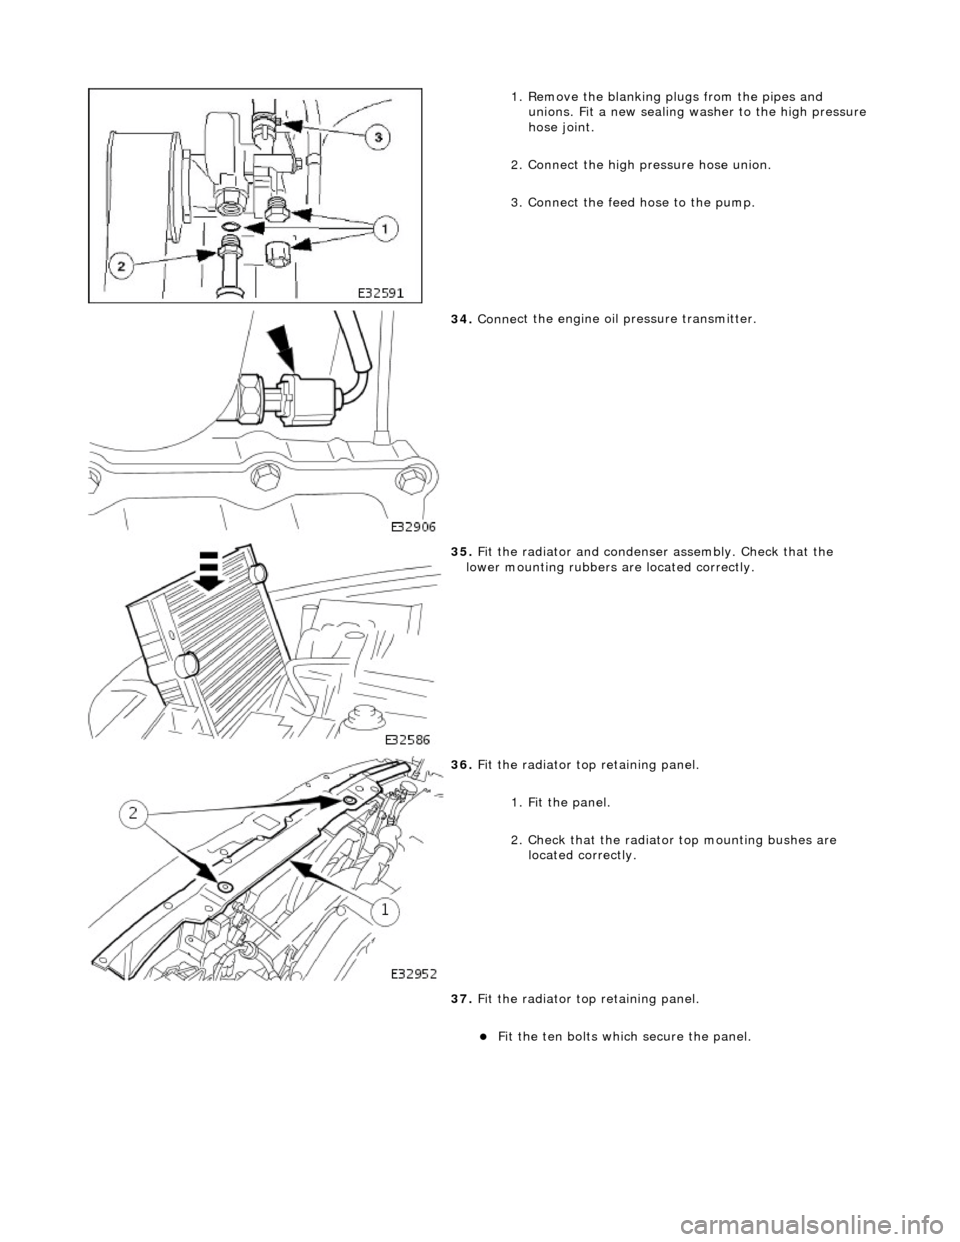 JAGUAR X308 1998 2.G User Guide  
1.
 Remove the blanking plugs from the pipes and 
unions. Fit a new sealing washer to the high pressure 
hose joint. 
2. Connect the high pressure hose union. 
3. Connect the feed hose to the pump. 